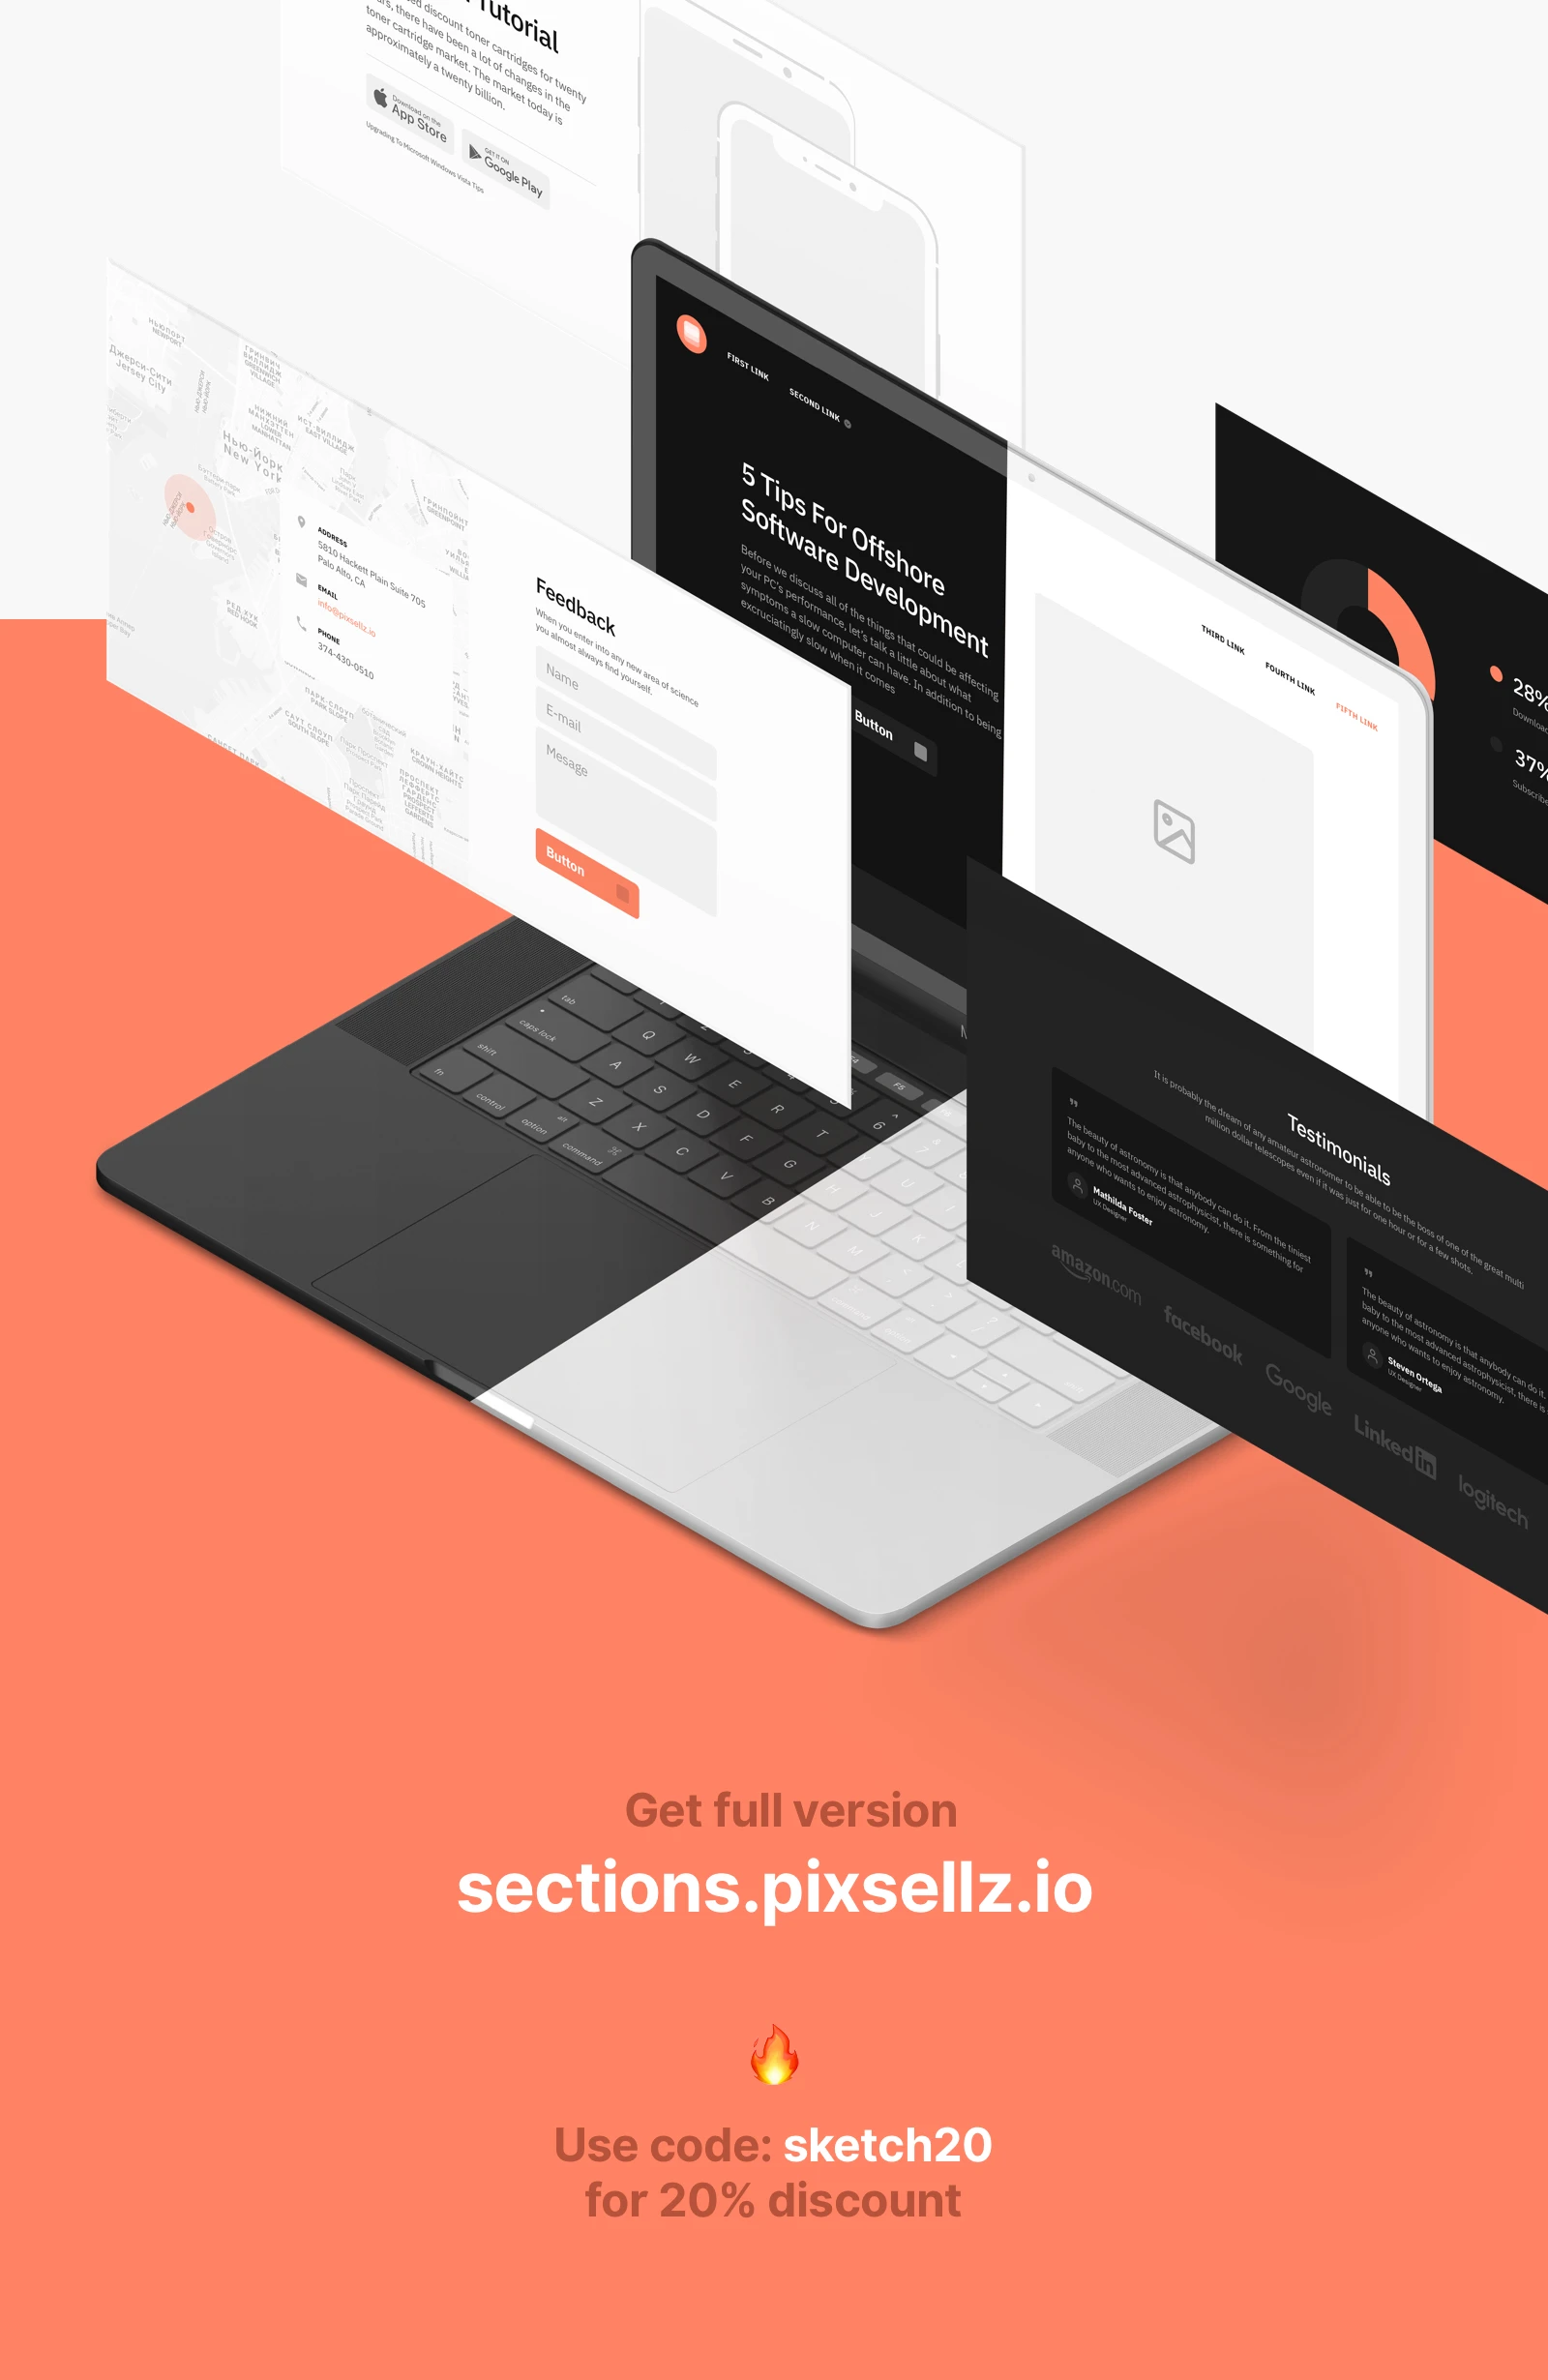 Sections - Landing Pages Wireframe Kit